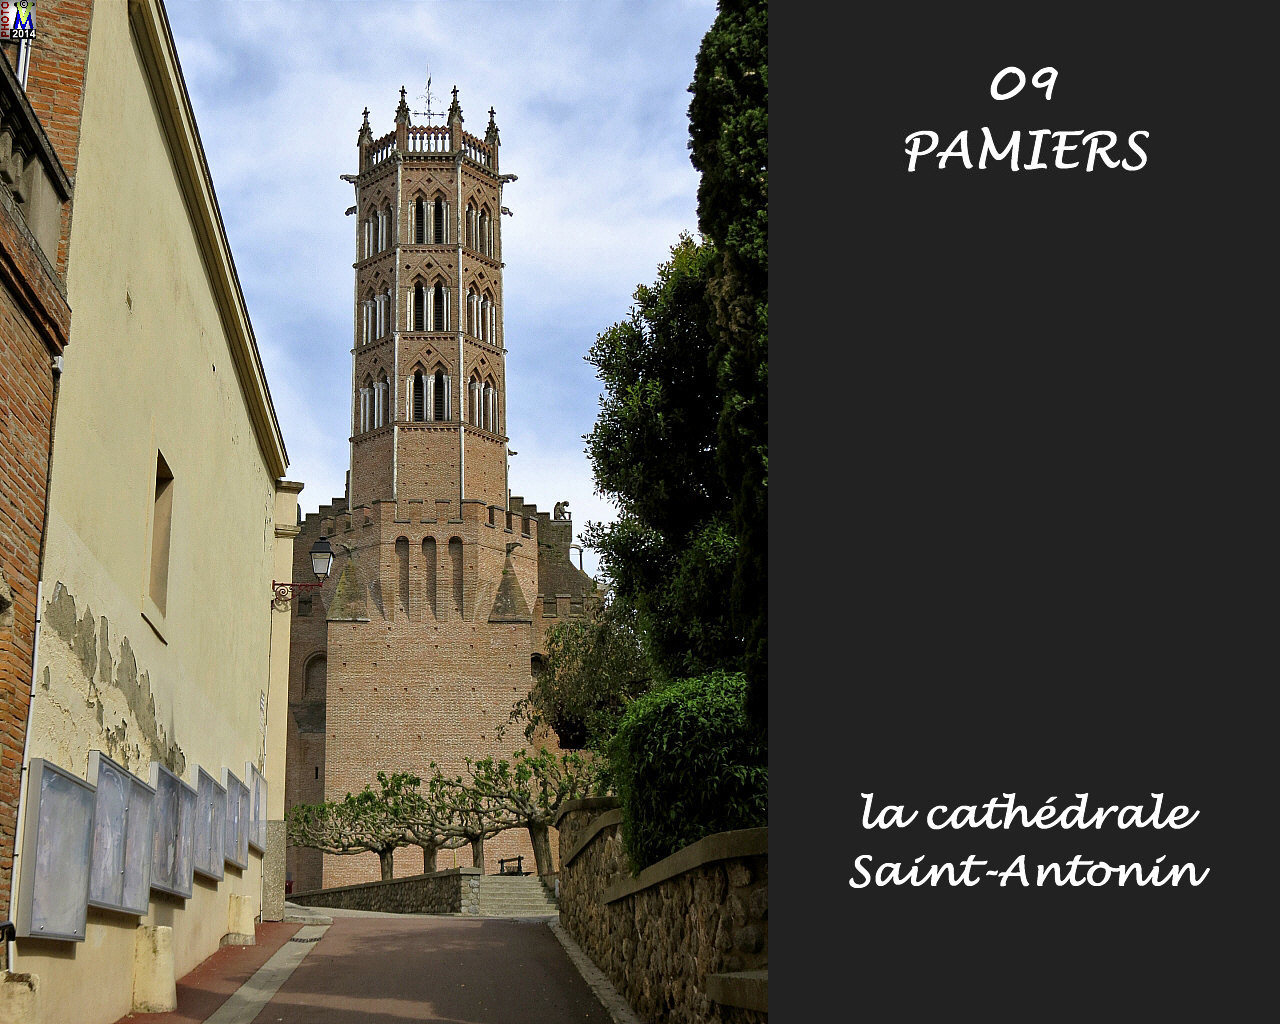 09PAMIERS_cathedrale_104.jpg